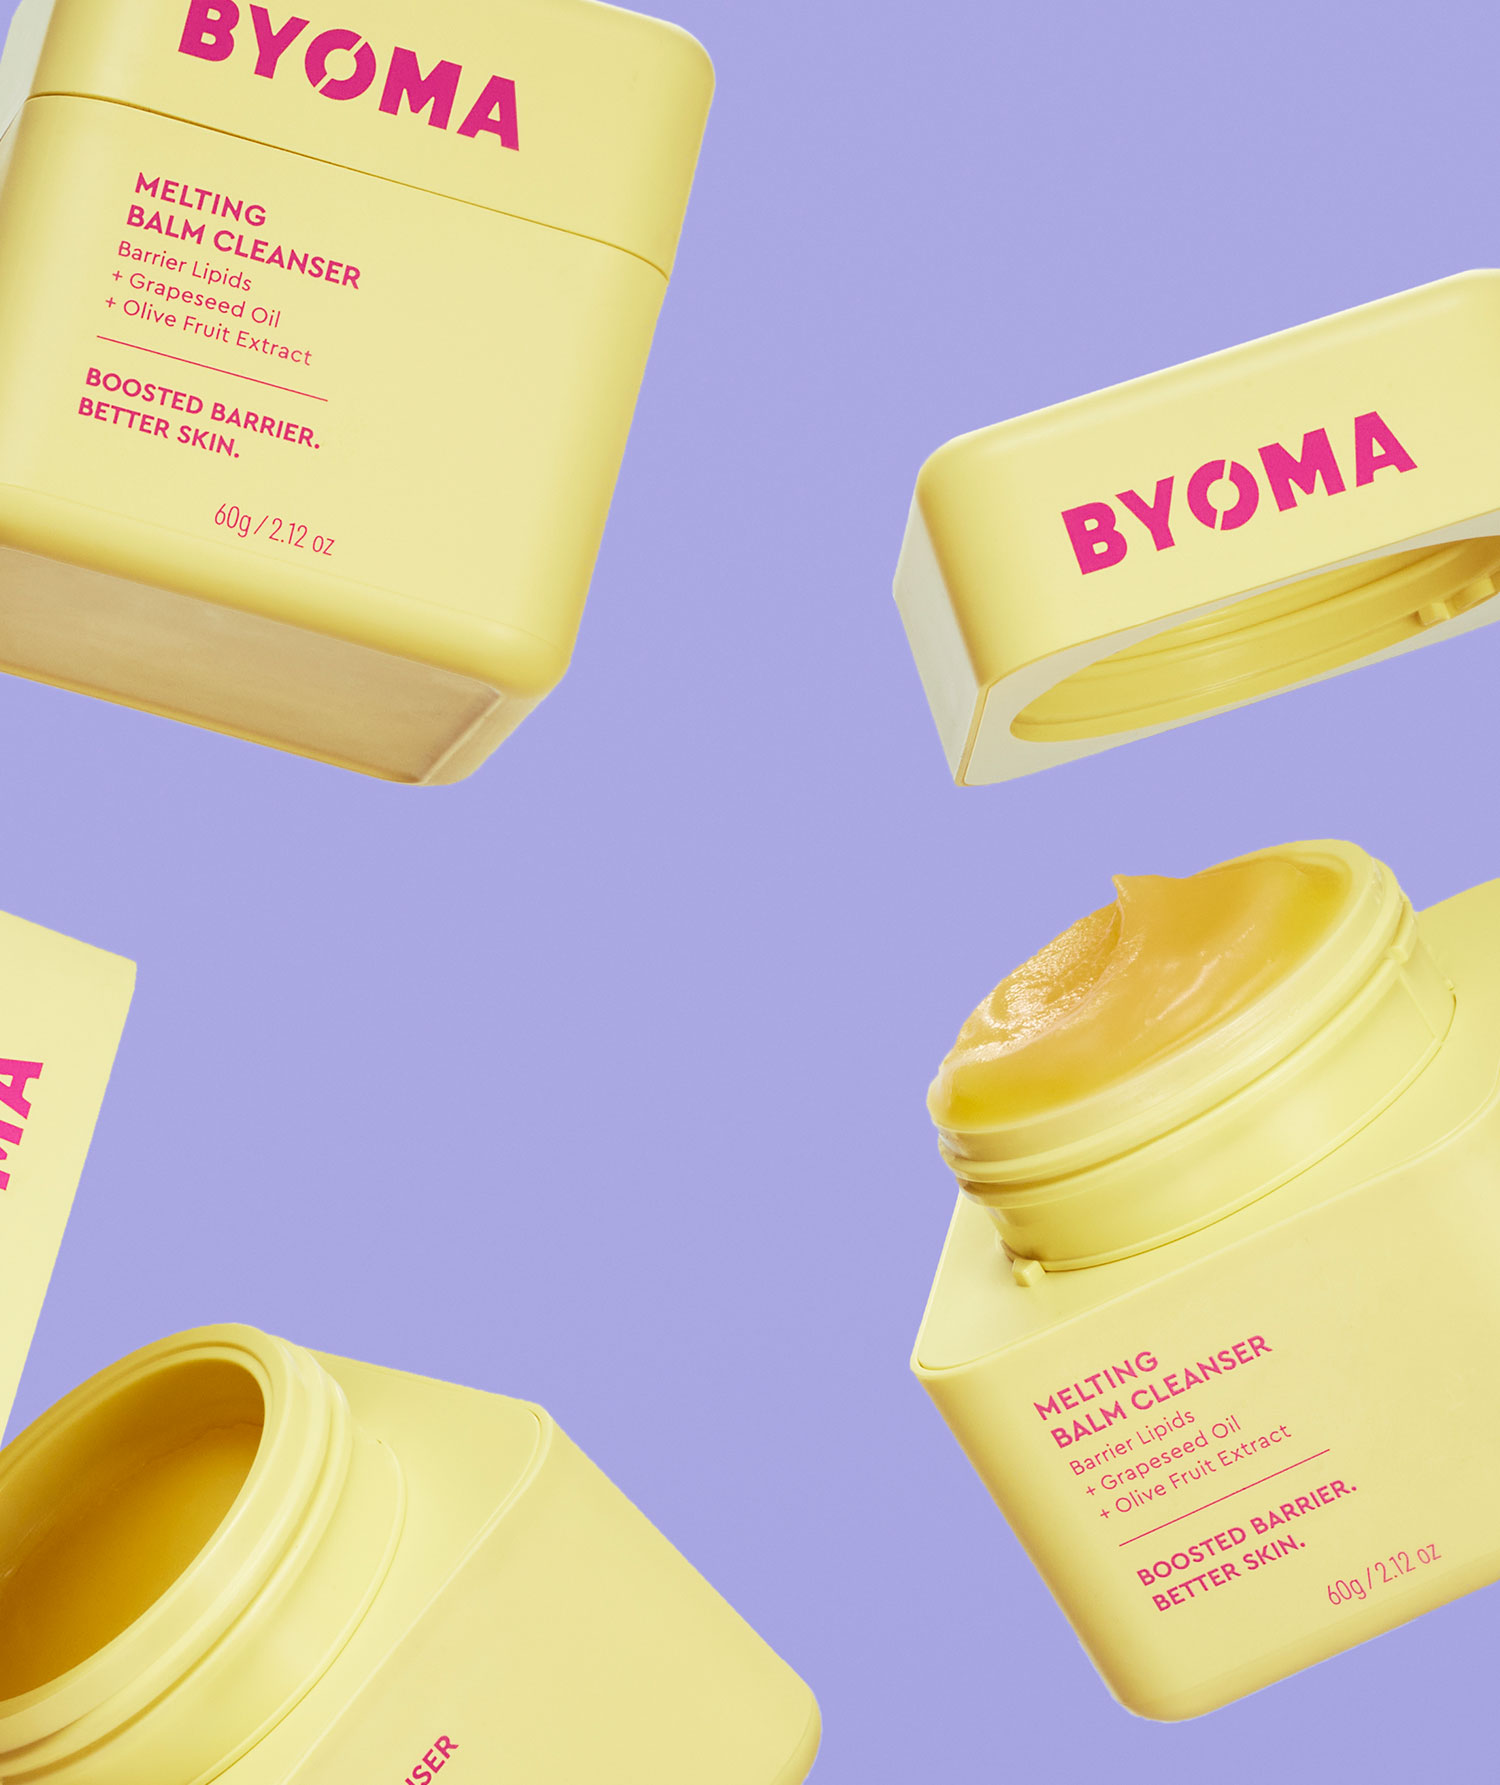 BYOMA Melting Balm Cleanser Cleansing Balm Review Test